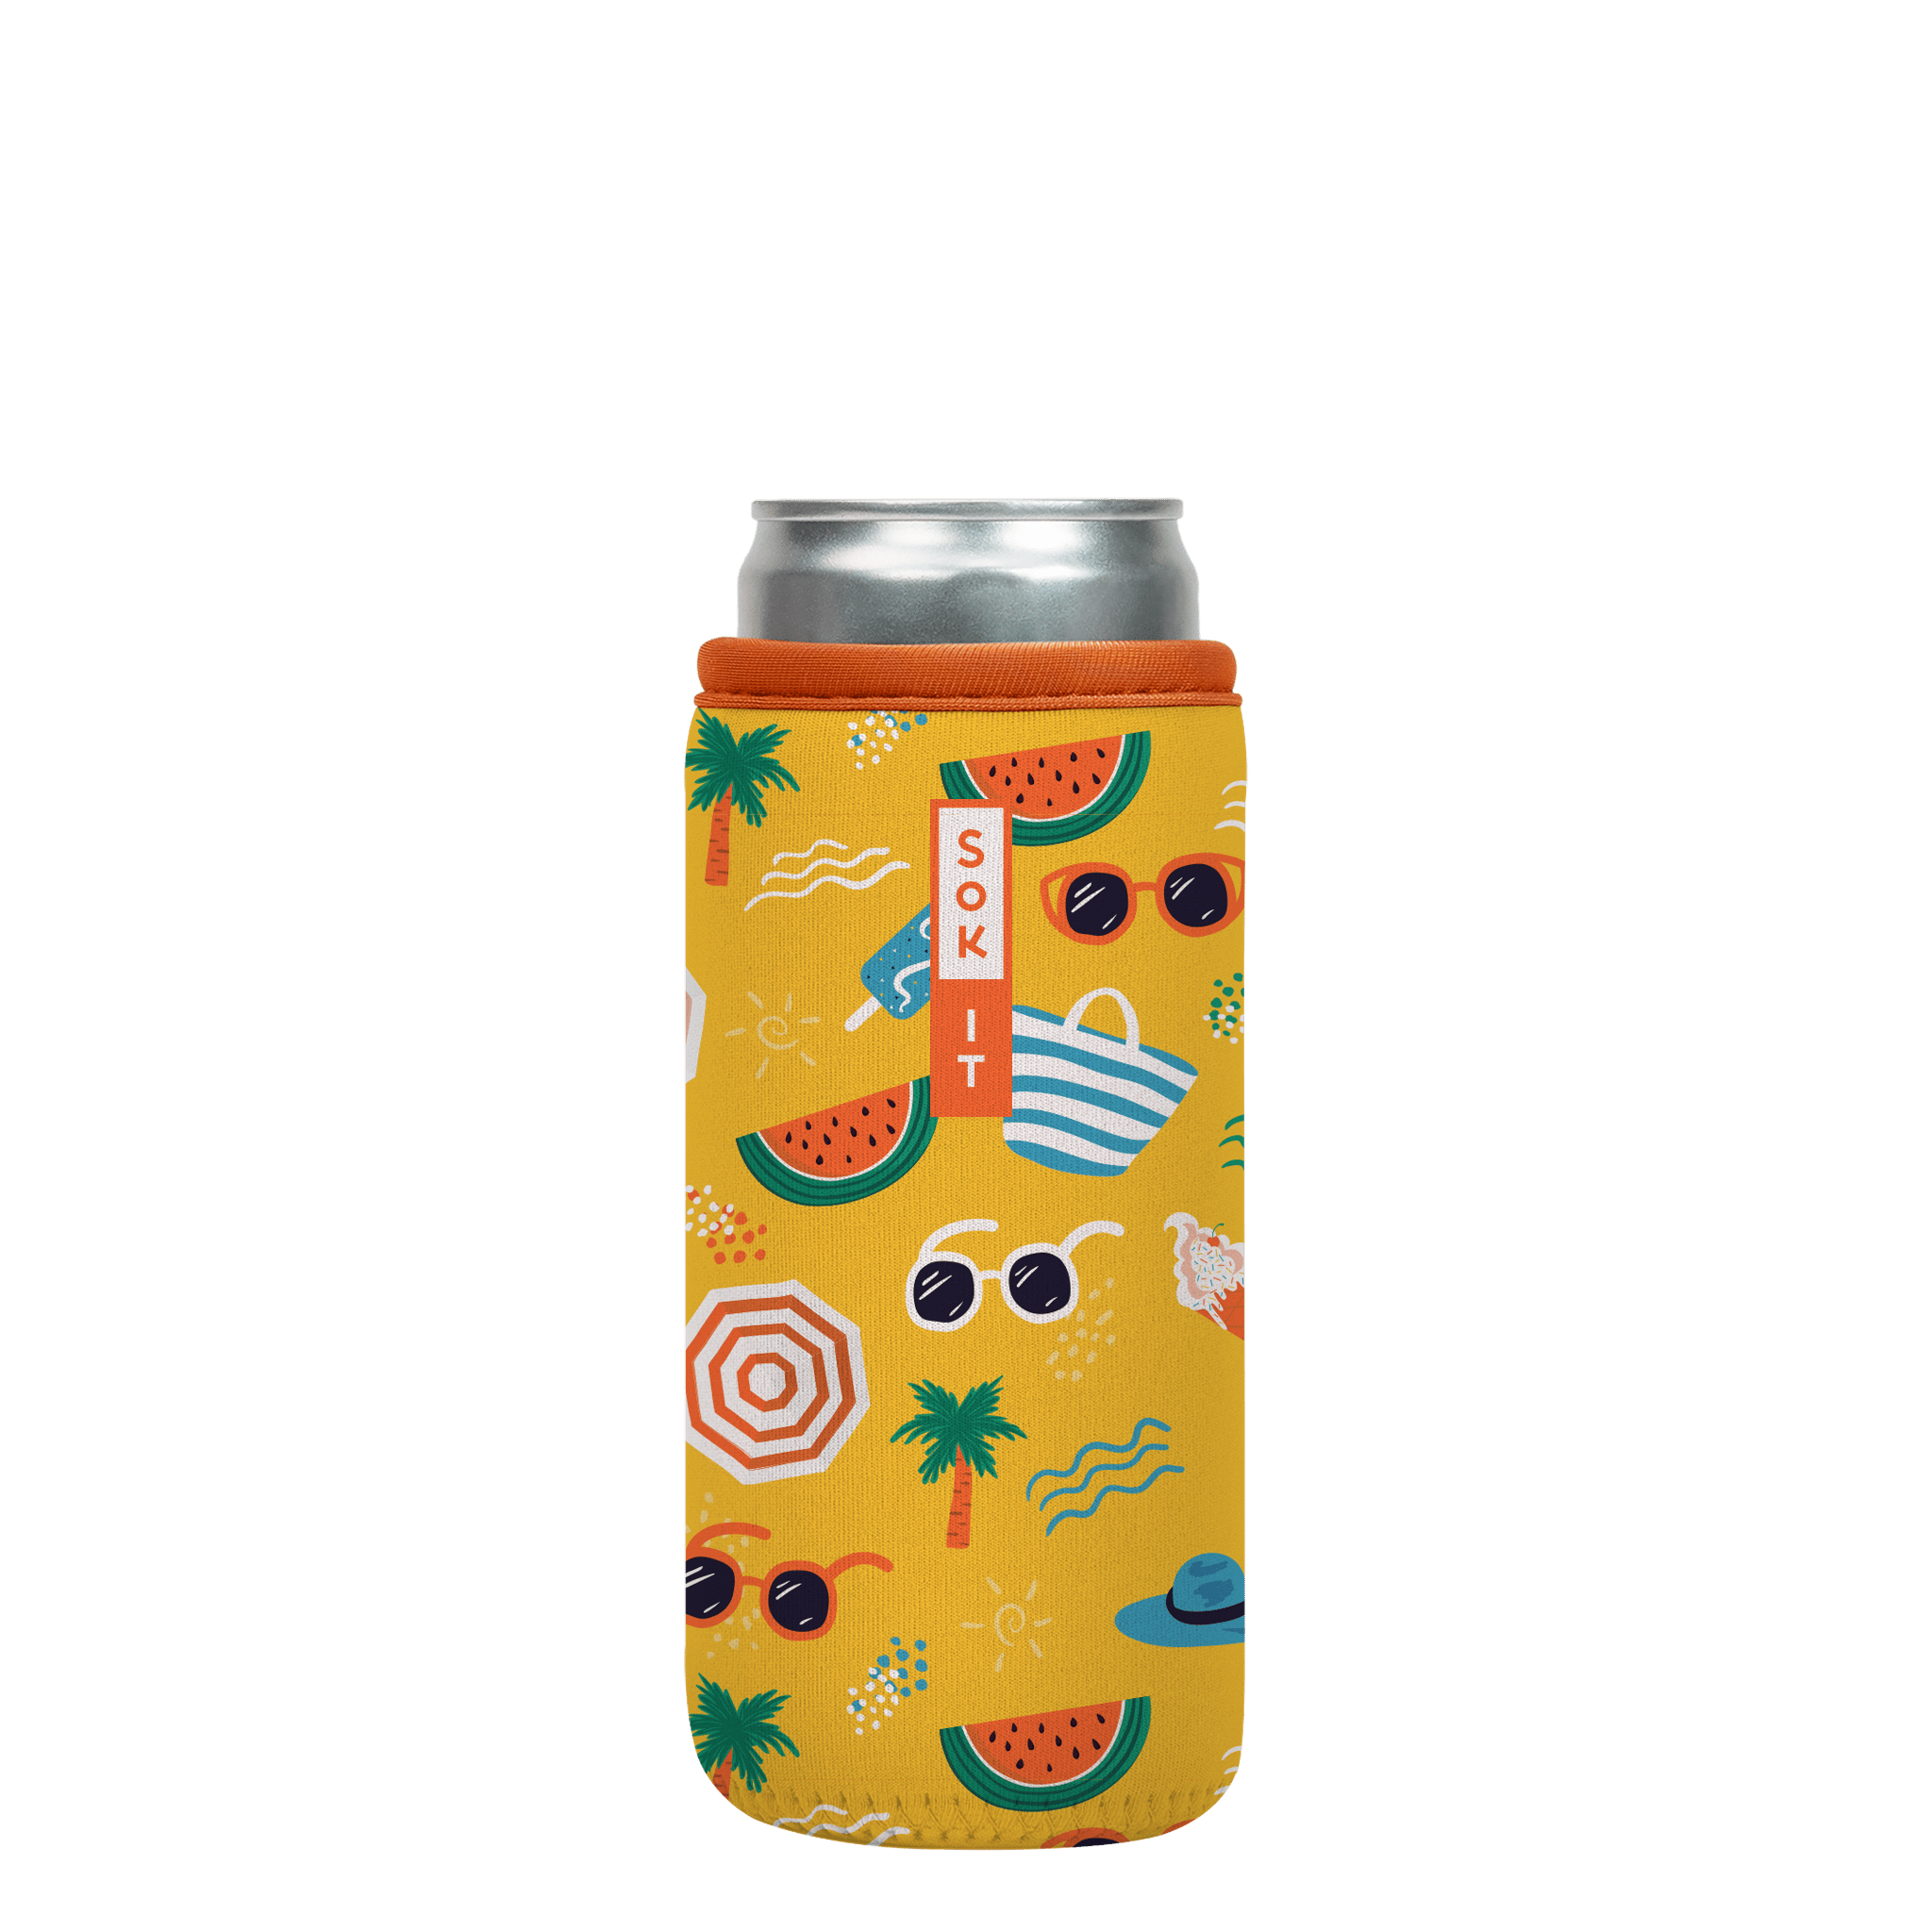 CanSok-Summertime 12oz Slim Can 